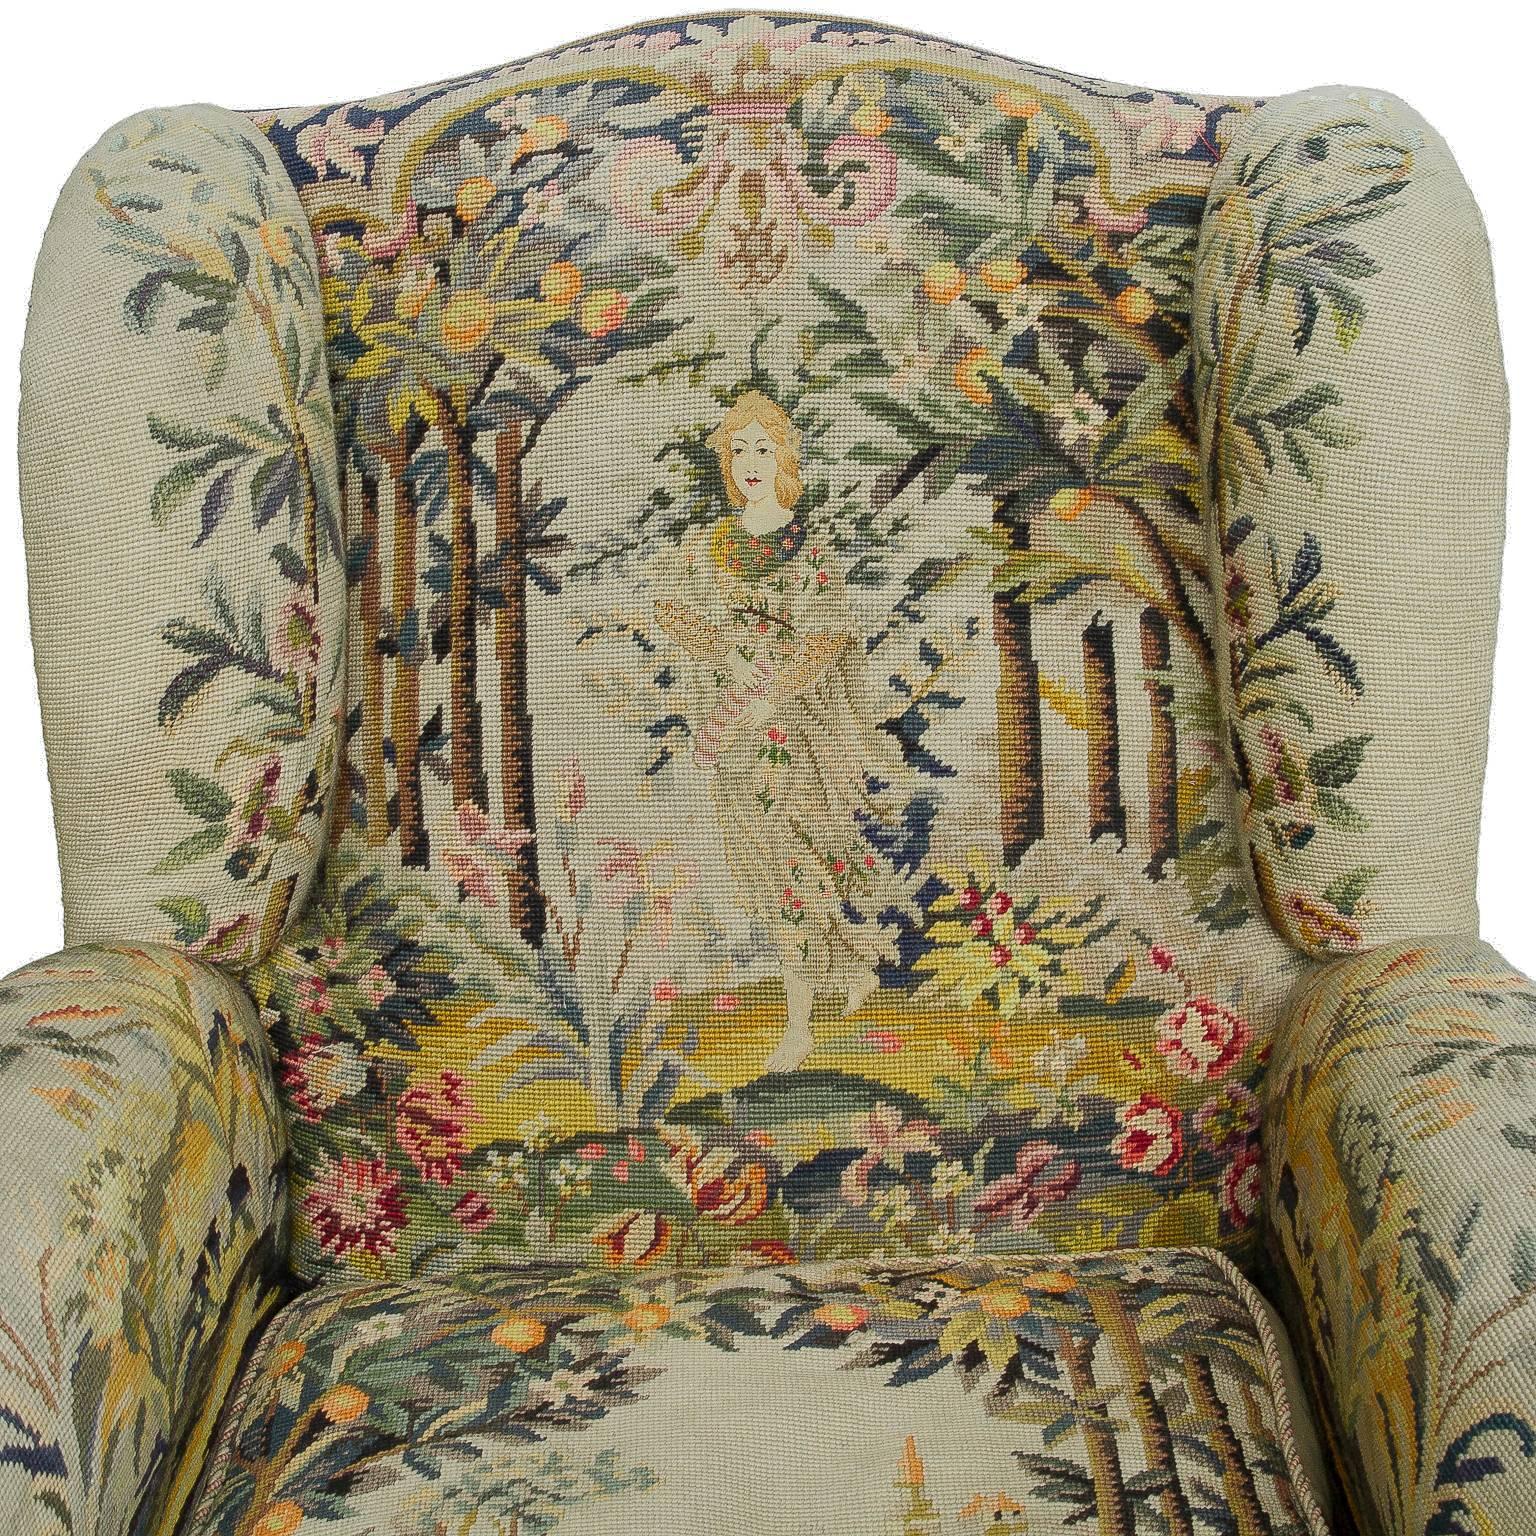 A unique and comfortable pair of of tapestry club chair style wing back chairs. These are made in the Chippendale style. The tapestry coverings are in excellent condition for the age. The tapestry however does not match but compliments each other.